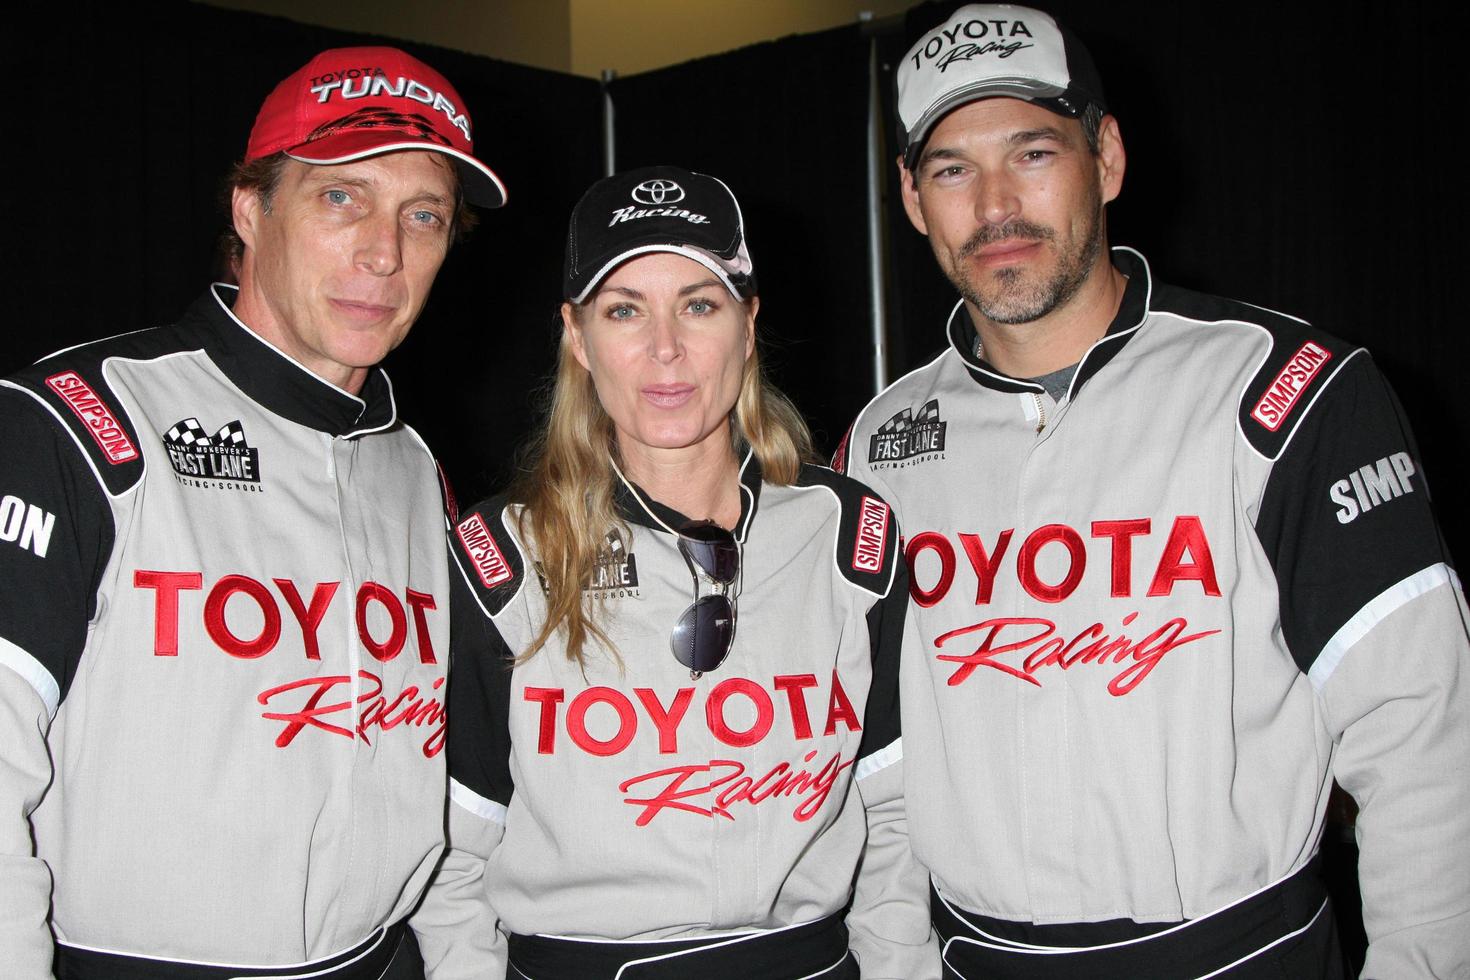 LOS ANGELES, MAR 17 - William Fitchner Eileen Davidson Eddie Cibrian at the training session for the 36th Toyota Pro Celebrity Race to be held in Long Beach, CA on April 14, 2012 at the Willow Springs Racetrack on March 17, 2012 in Willow Springs, CA photo